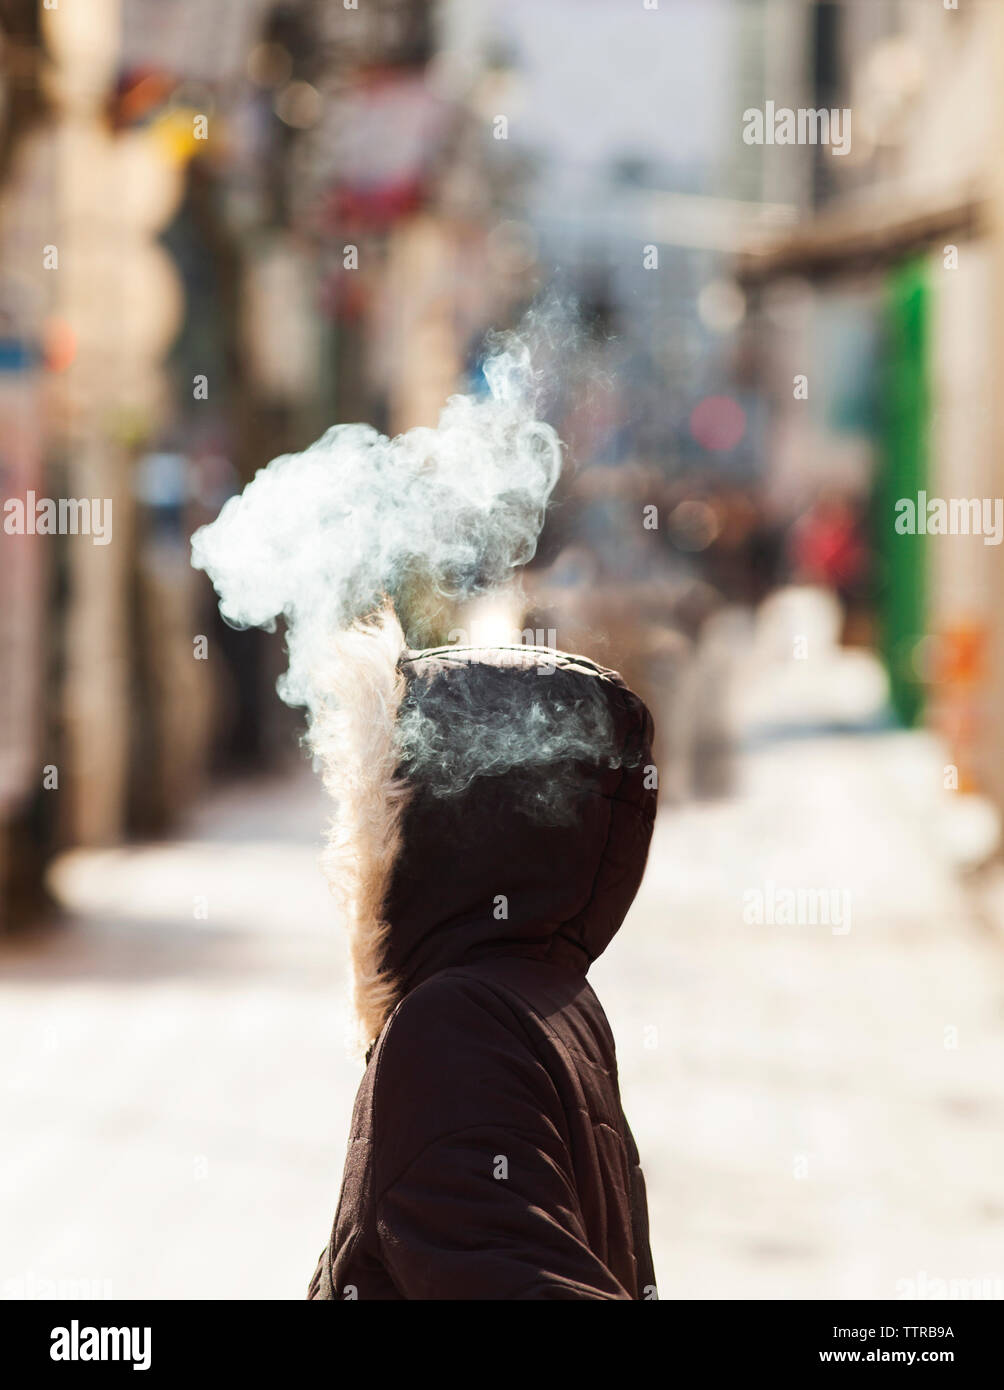 Digital composite image of smoke coming out from woman's hood Stock Photo